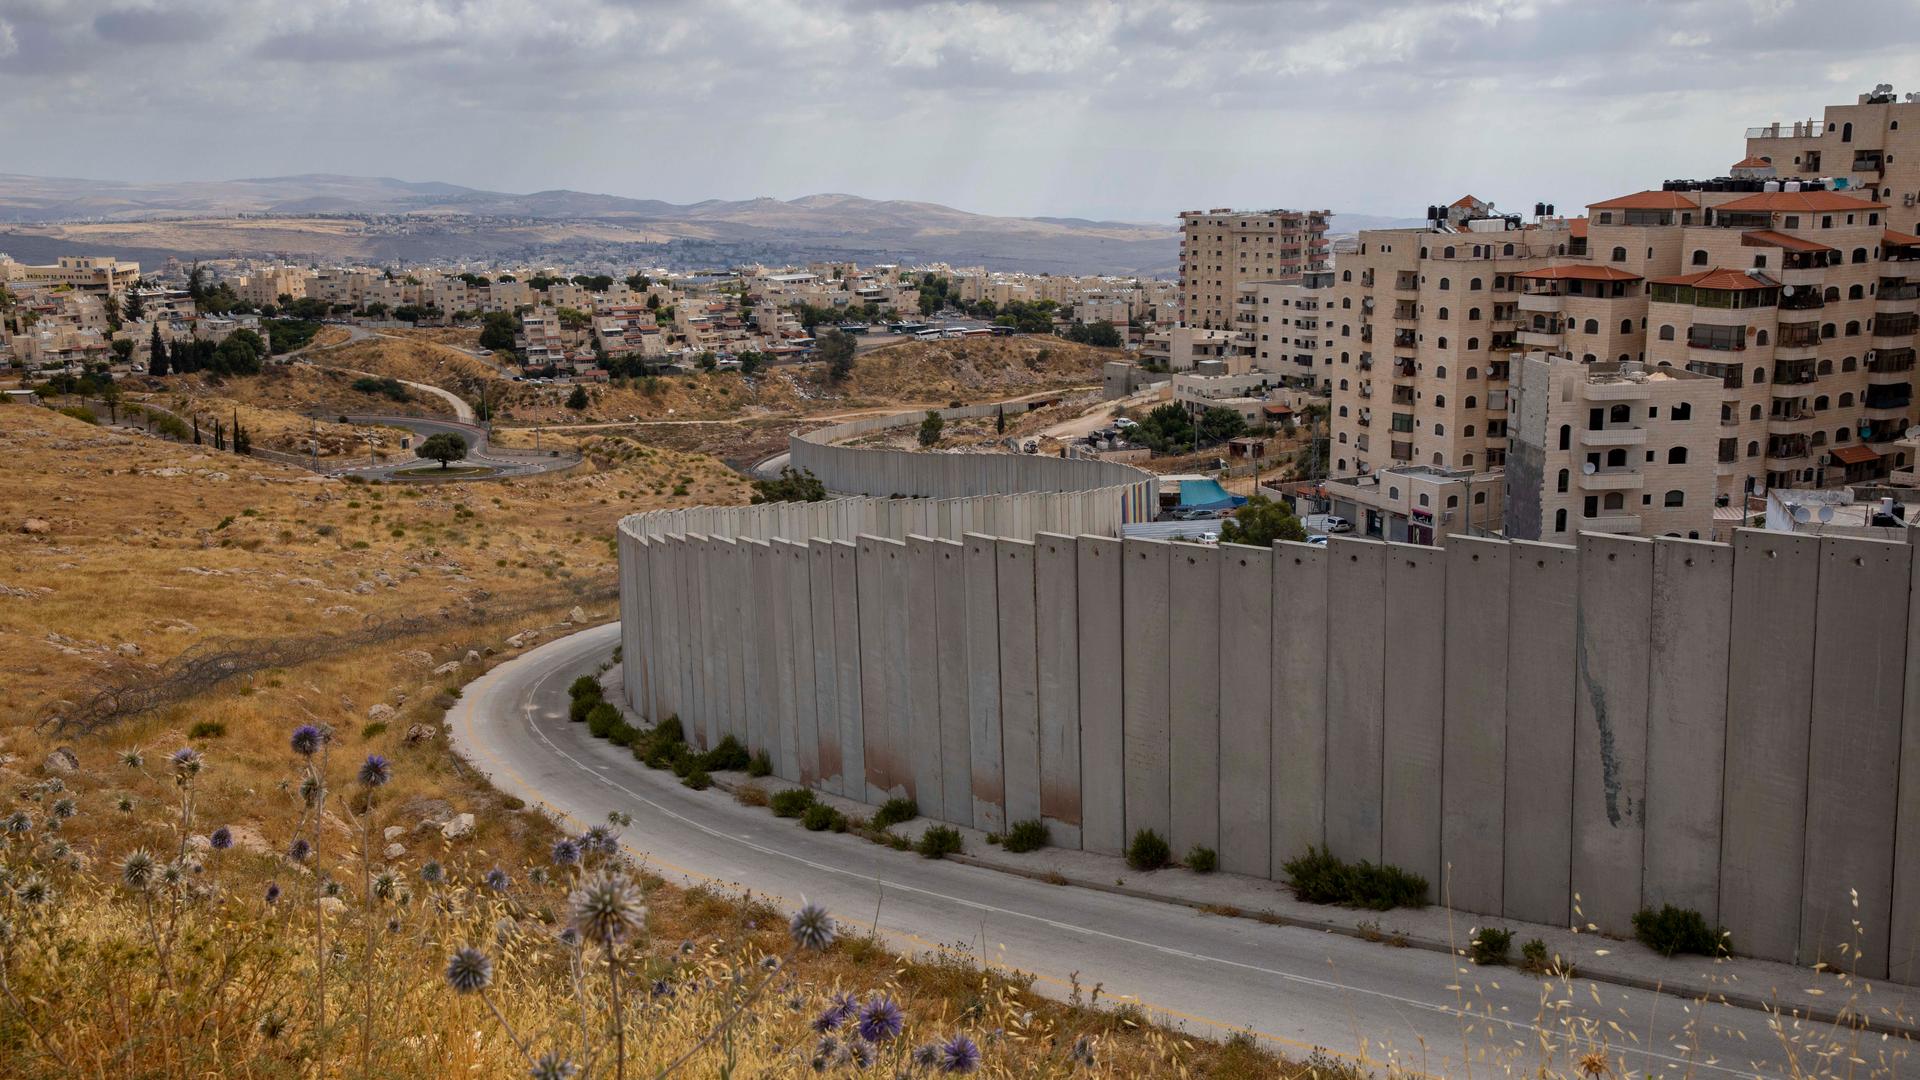 A view of Shuafat refugee camp is seen behind section of Israel's separation barrier in Jerusalem, June 19, 2020. 